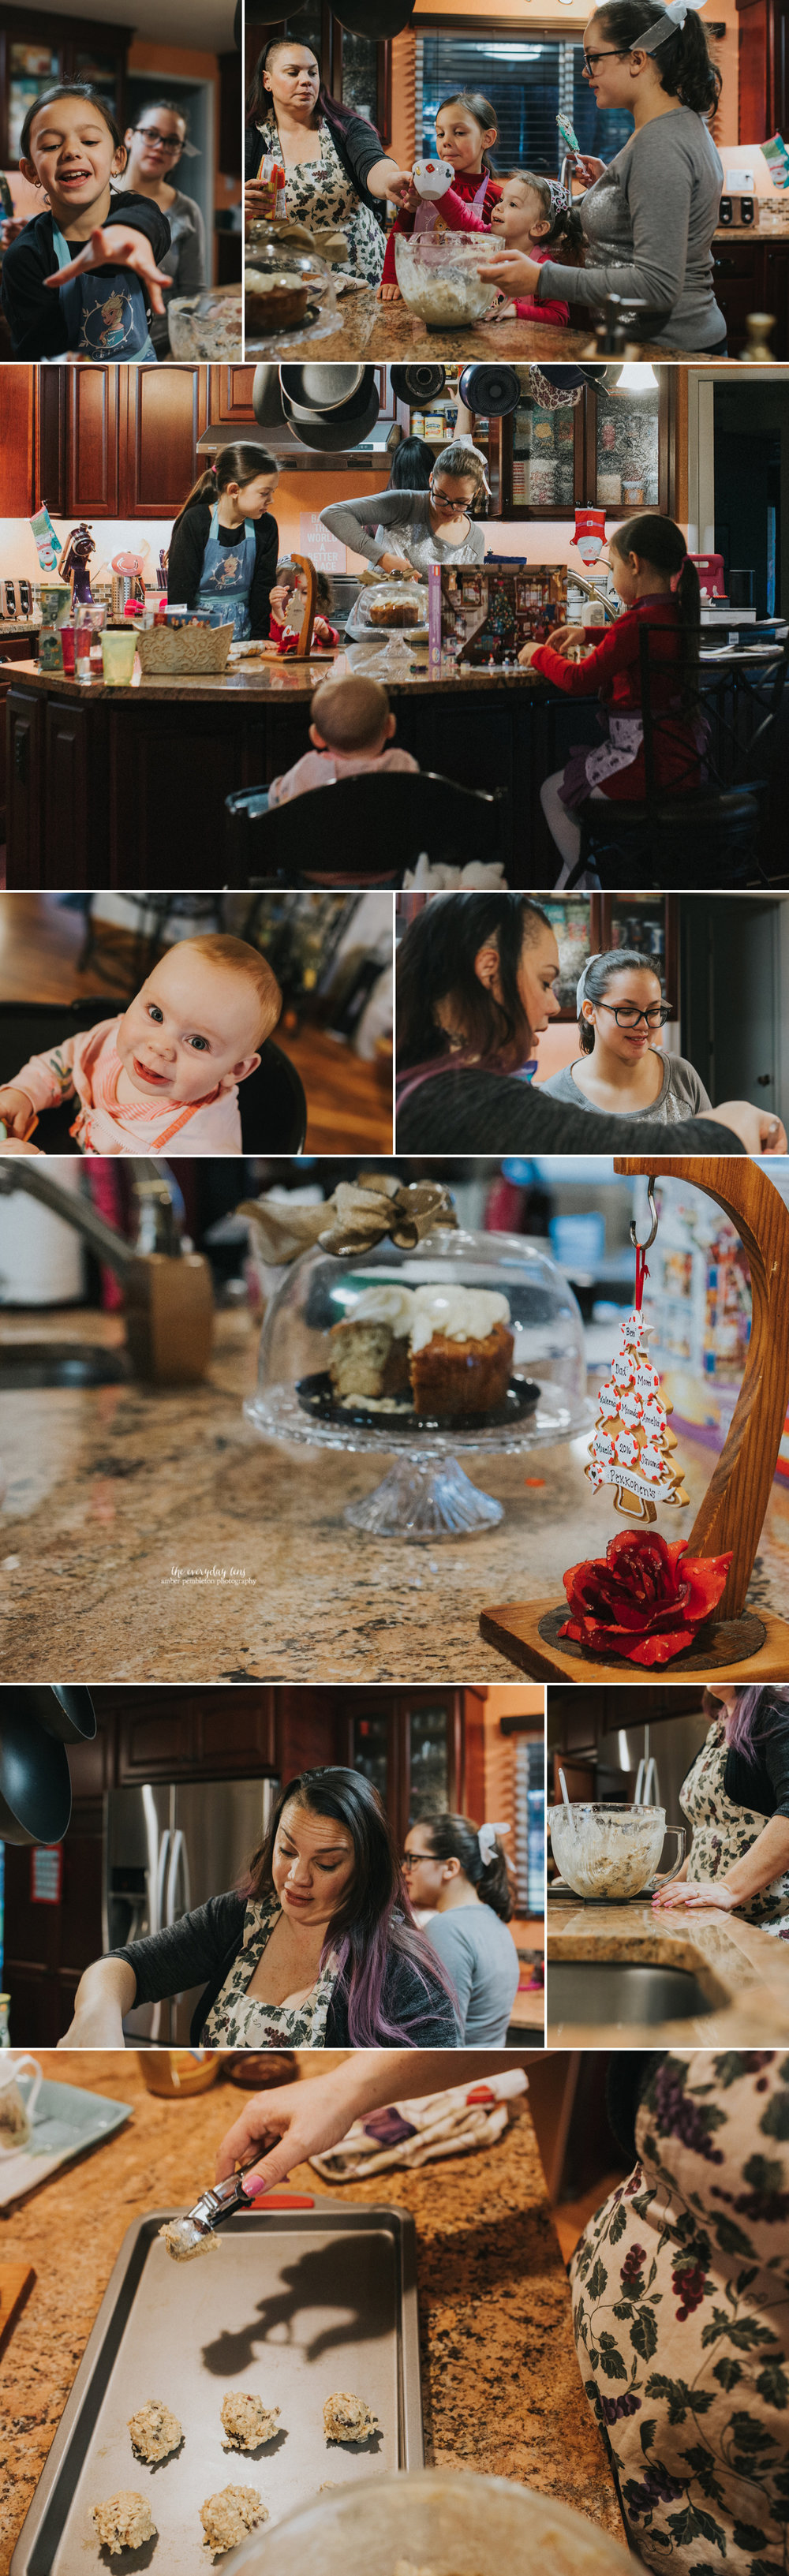 family-making-cookies-together-photography-session.jpg